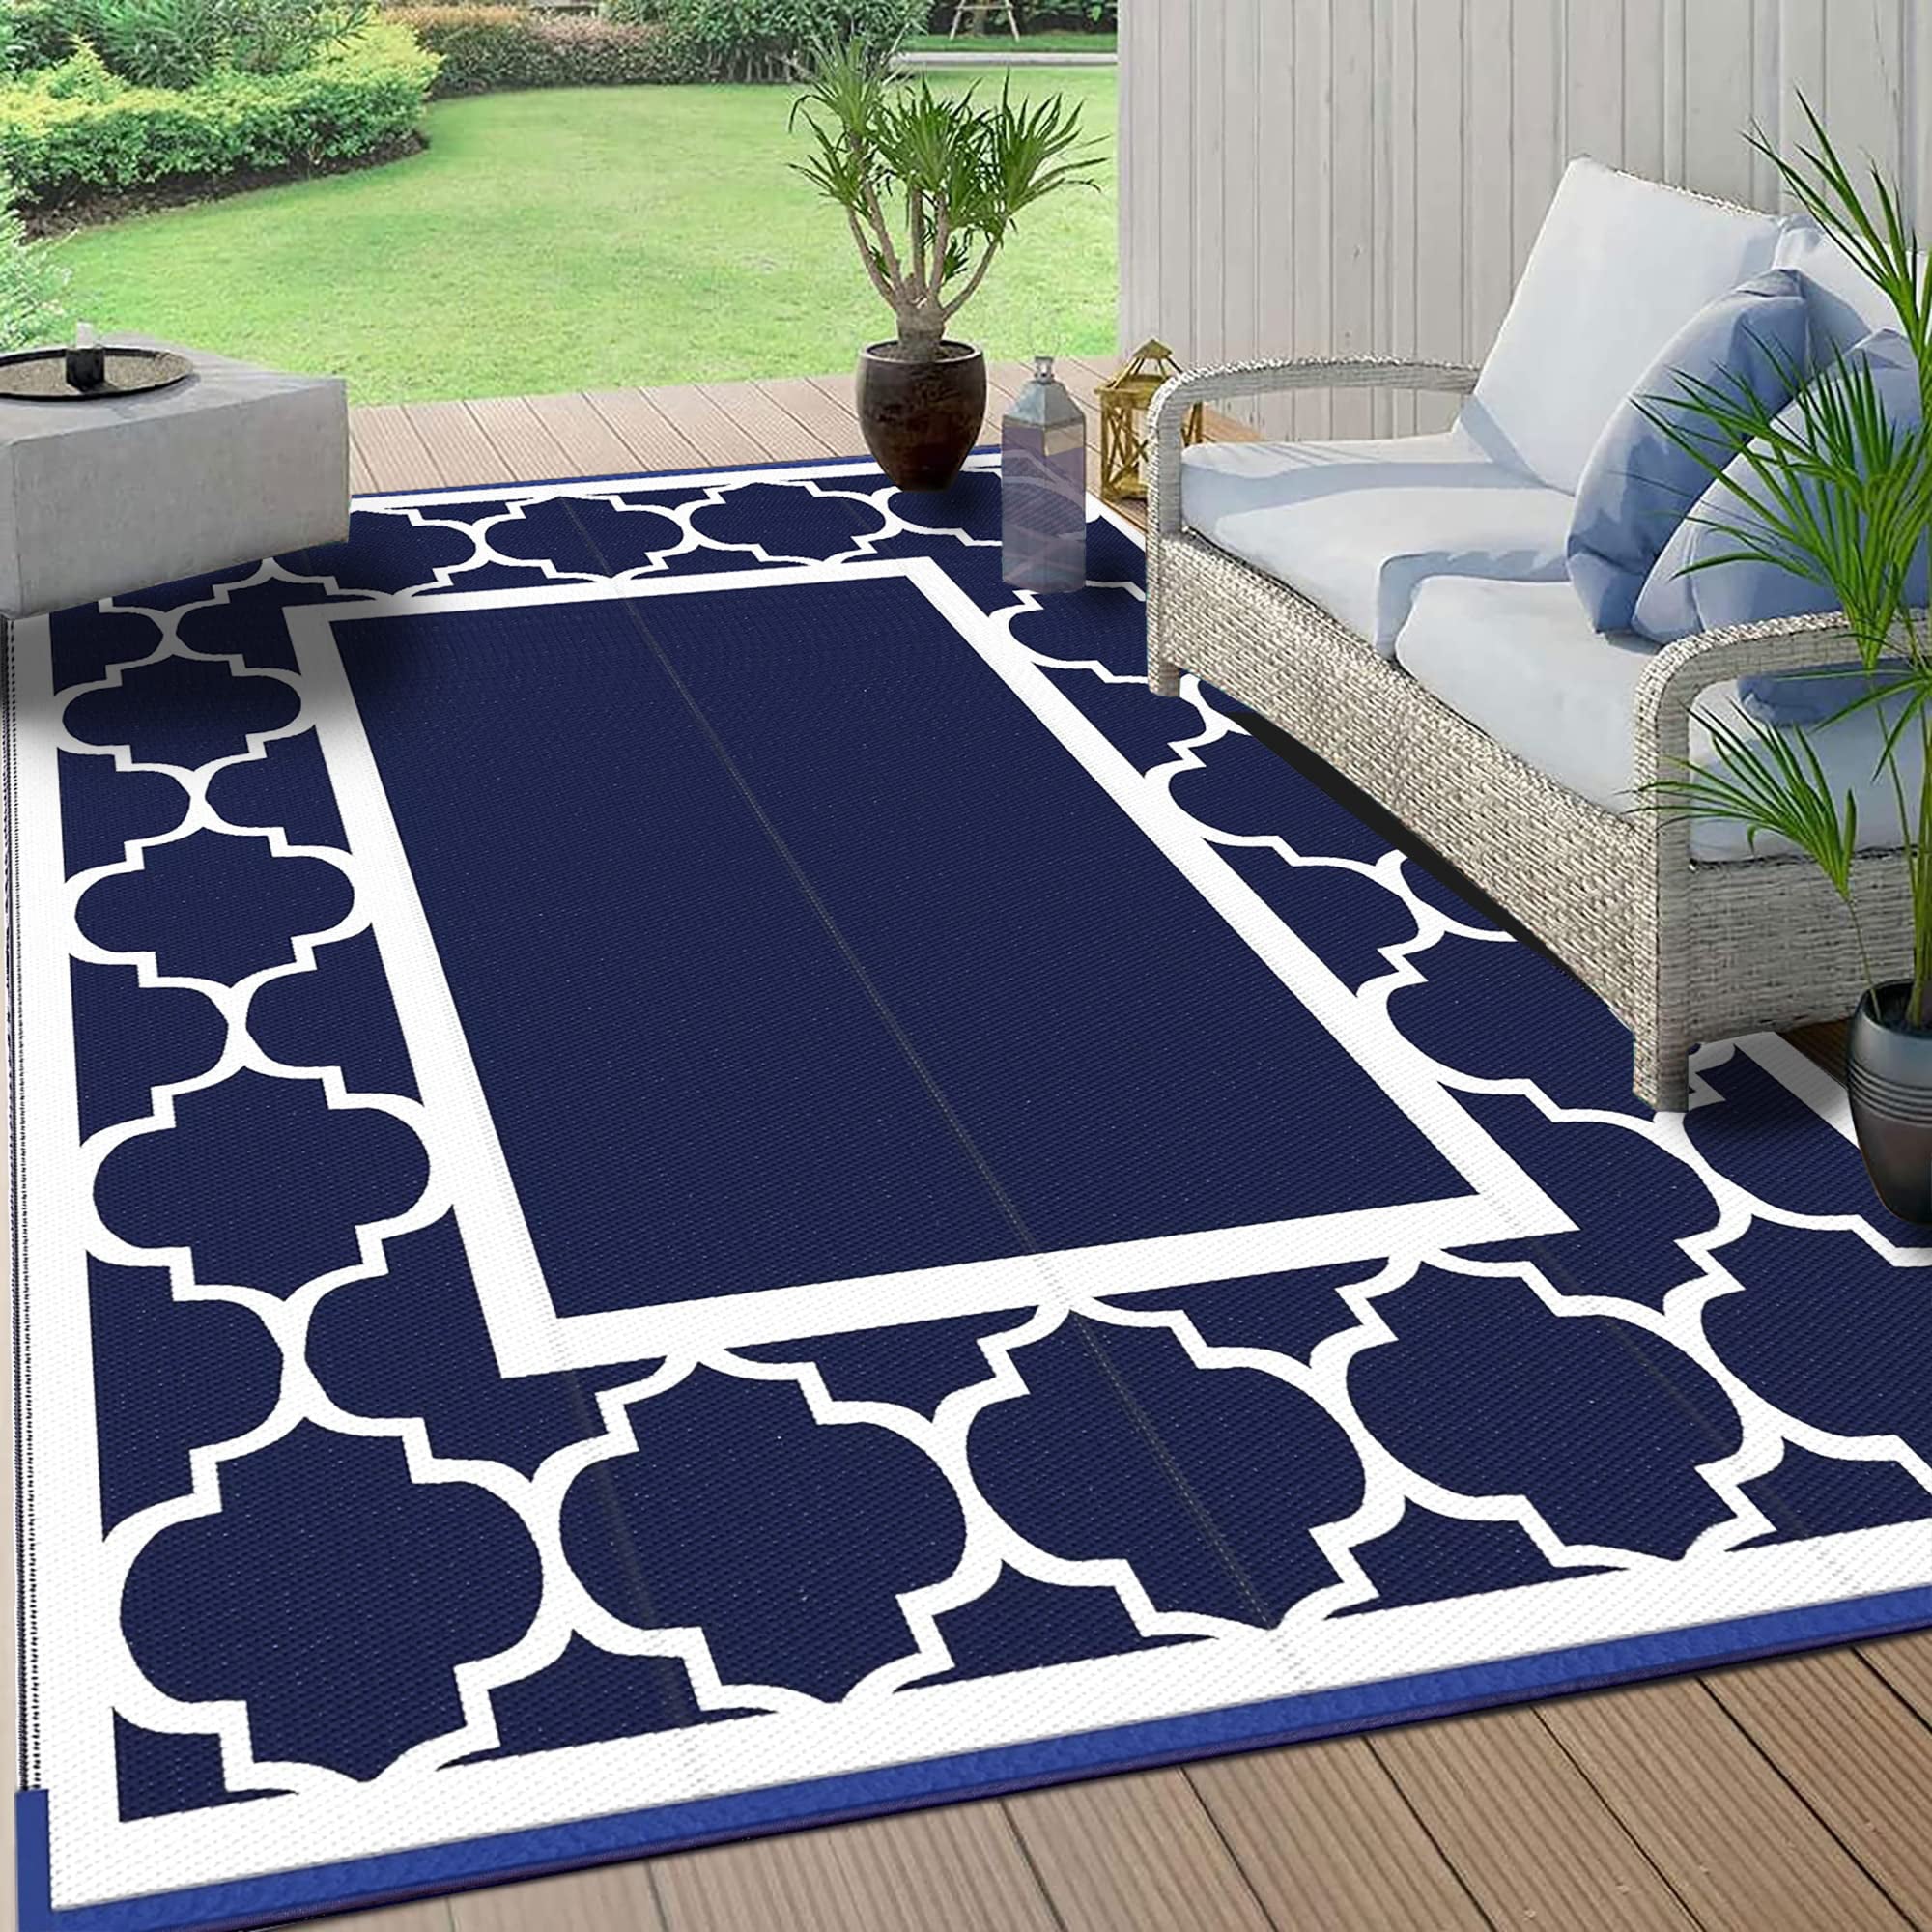 GENIMO Outdoor Rug for Patios Clearance, 5'x8' Reversible Tropical